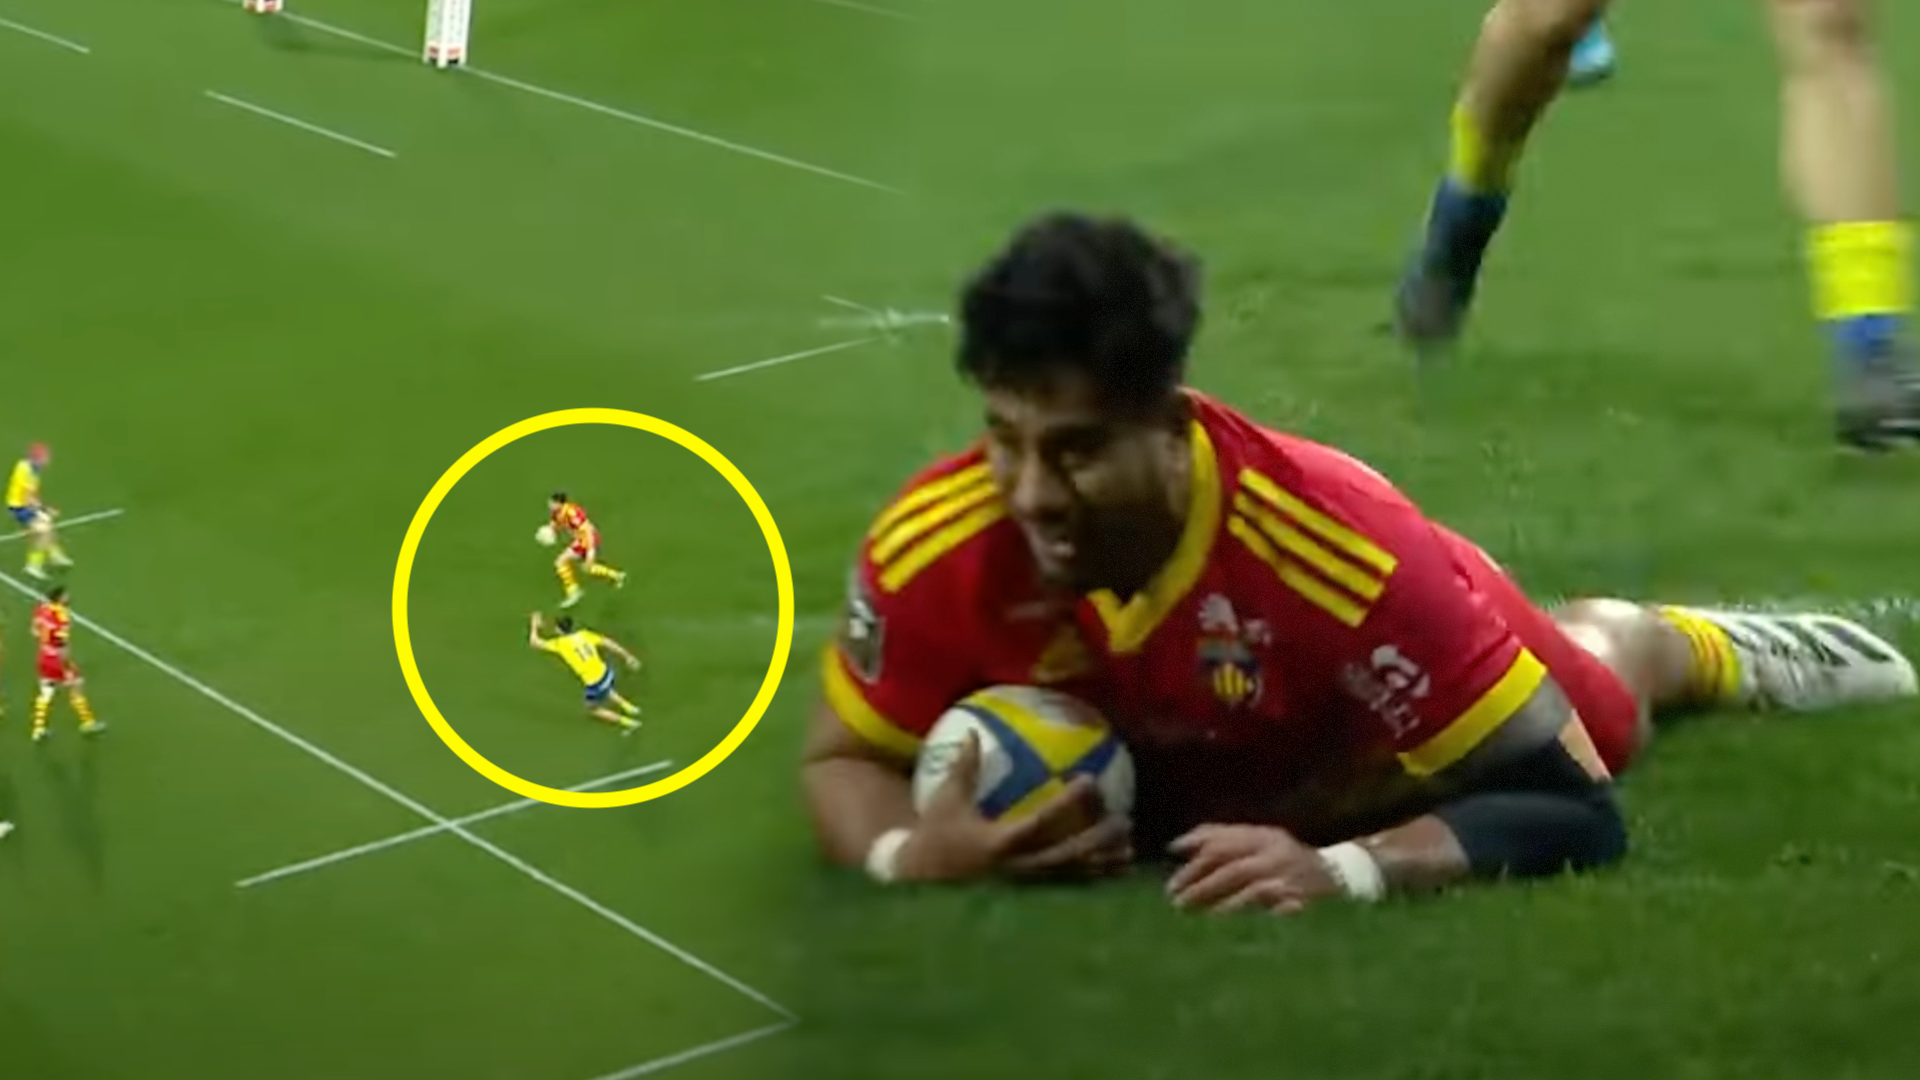 The 2023 try of the year has already been scored